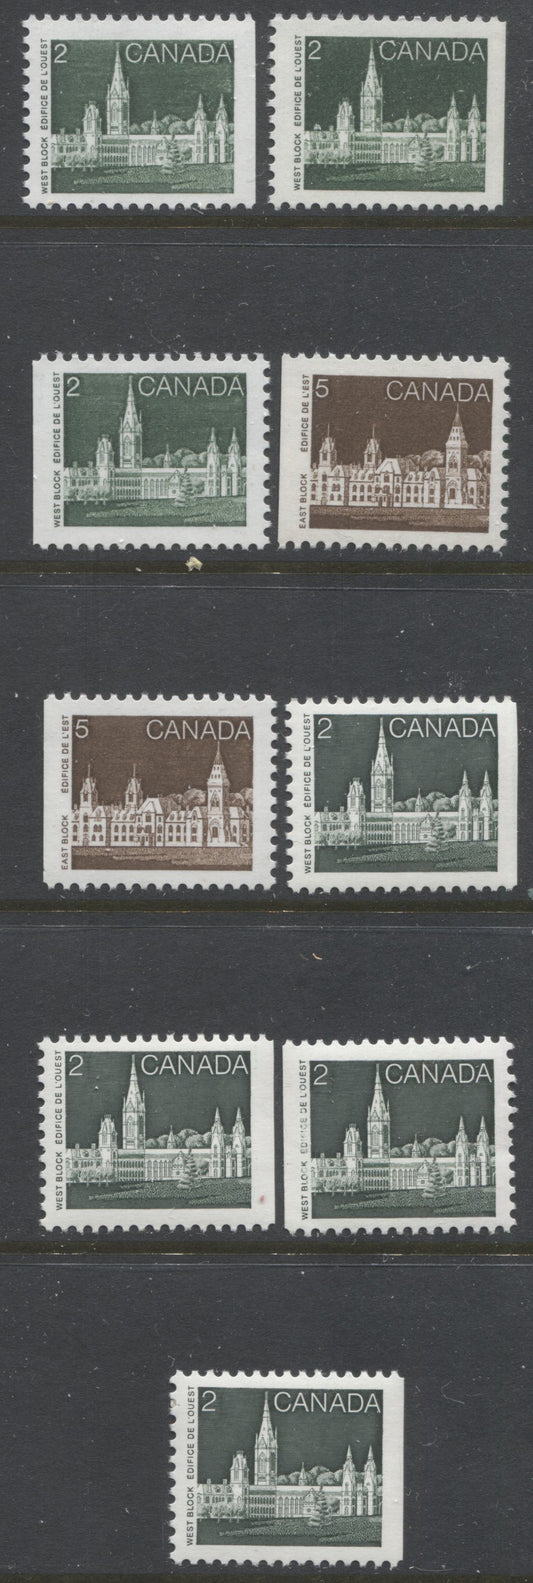 Lot 380 Canada #939i. 939a, 939ai, 941i 2c. 5c Deep Green & Deep Brown Parliament Buildings, 1982-1987 Artifacts & National Parks Issue, 9 VFNH Booklet Singles, NF/NF to LF/LF, Rolland & Harrison Papers